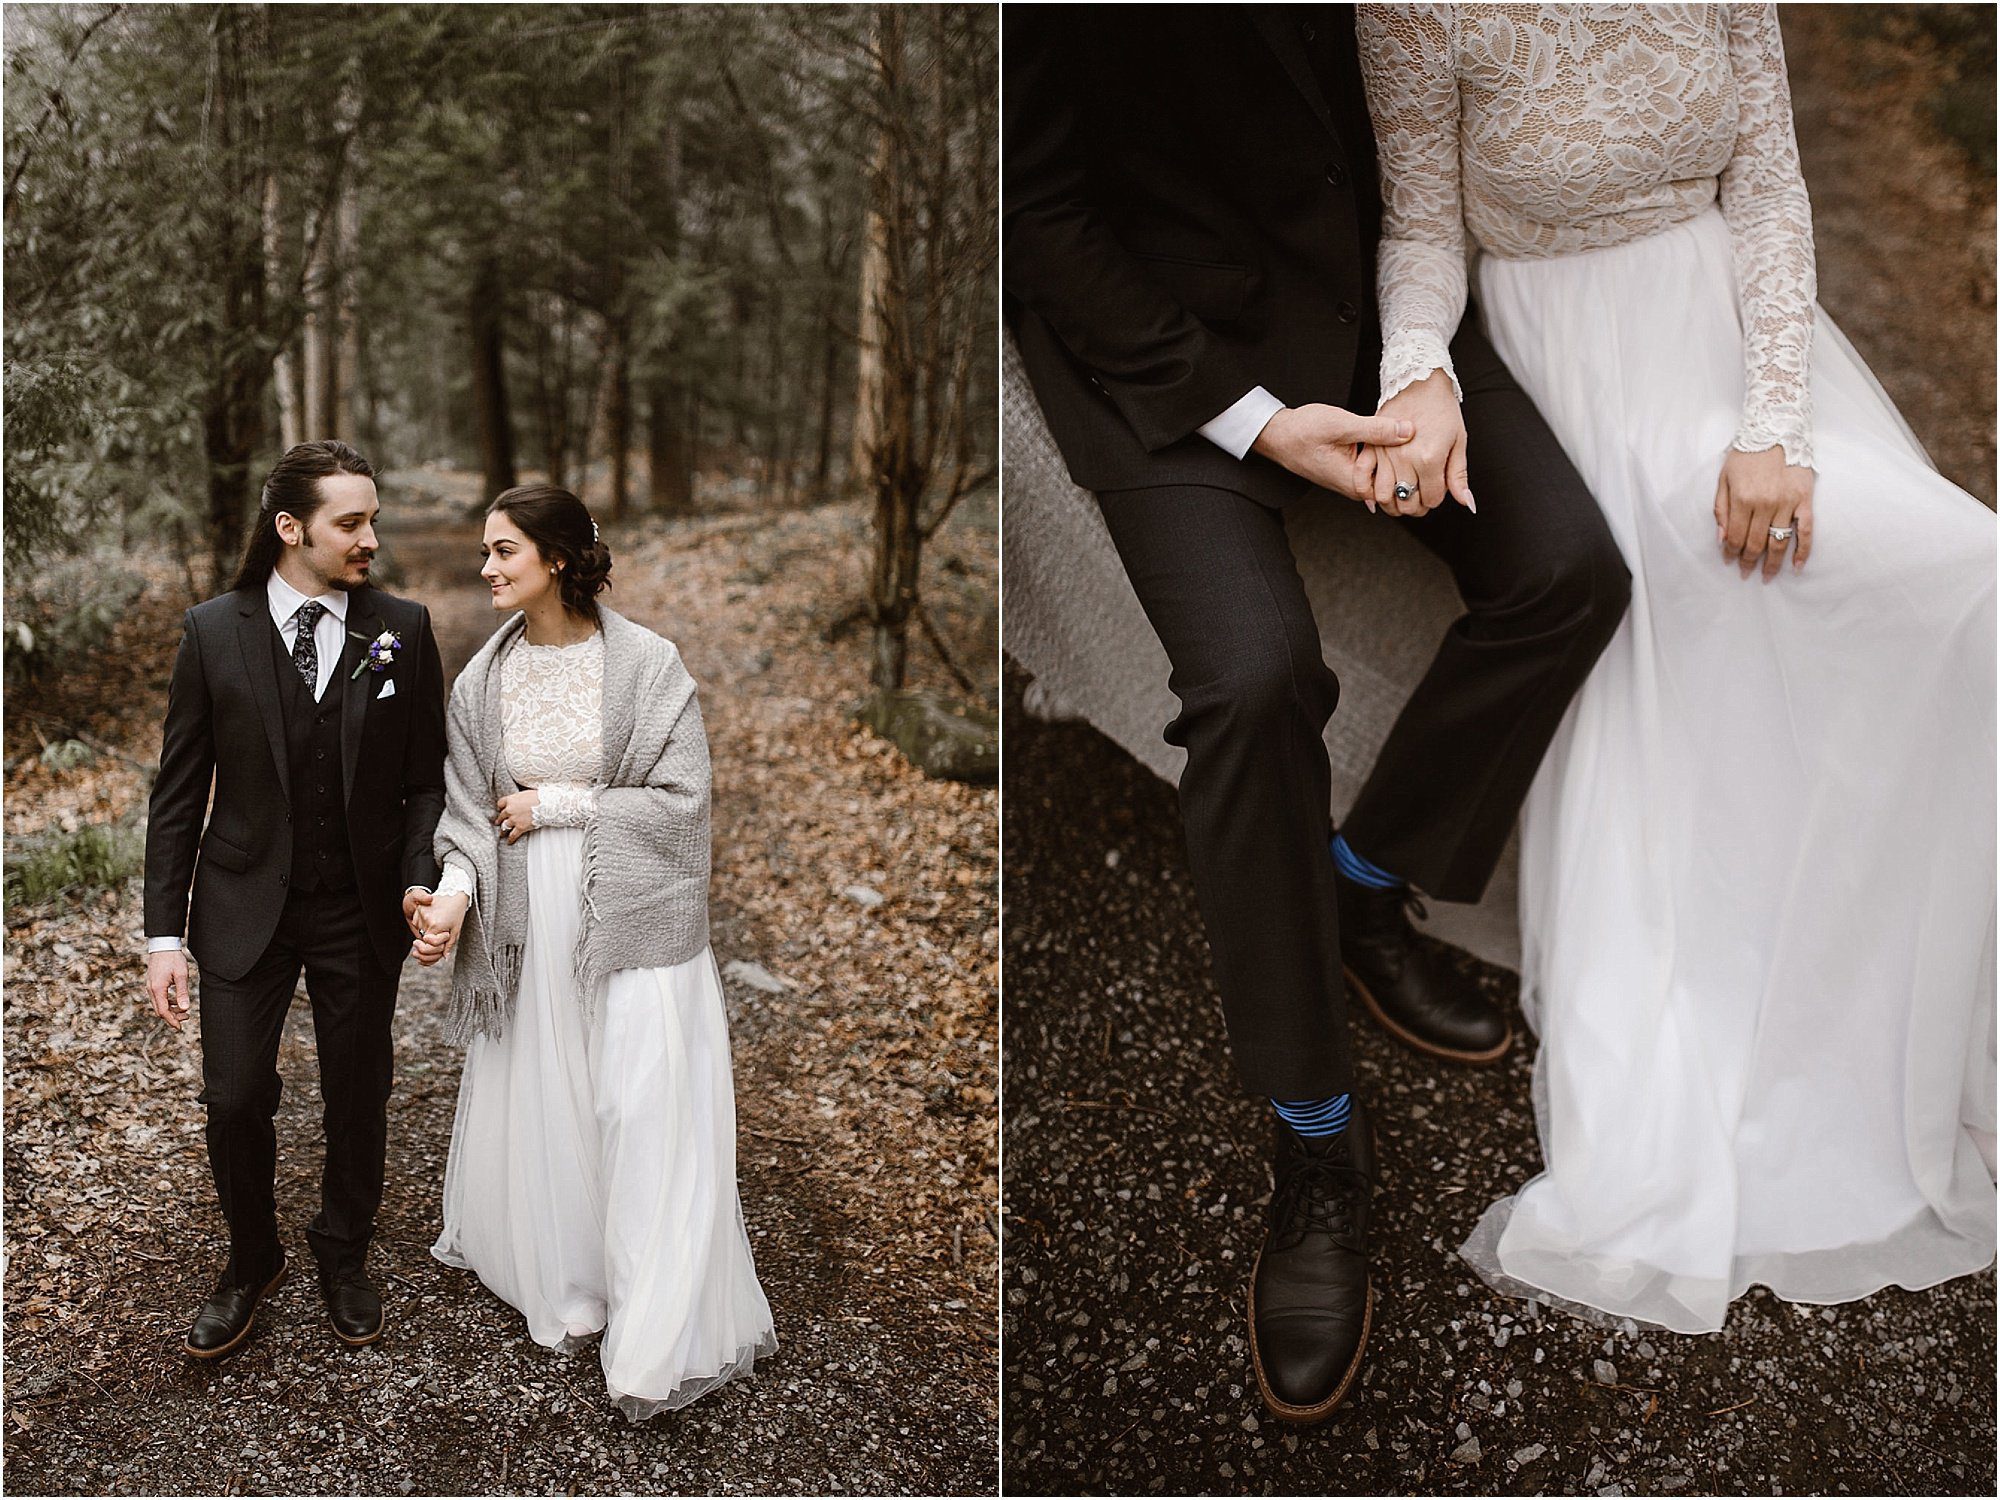 Bride and Groom walking with each other at elopement